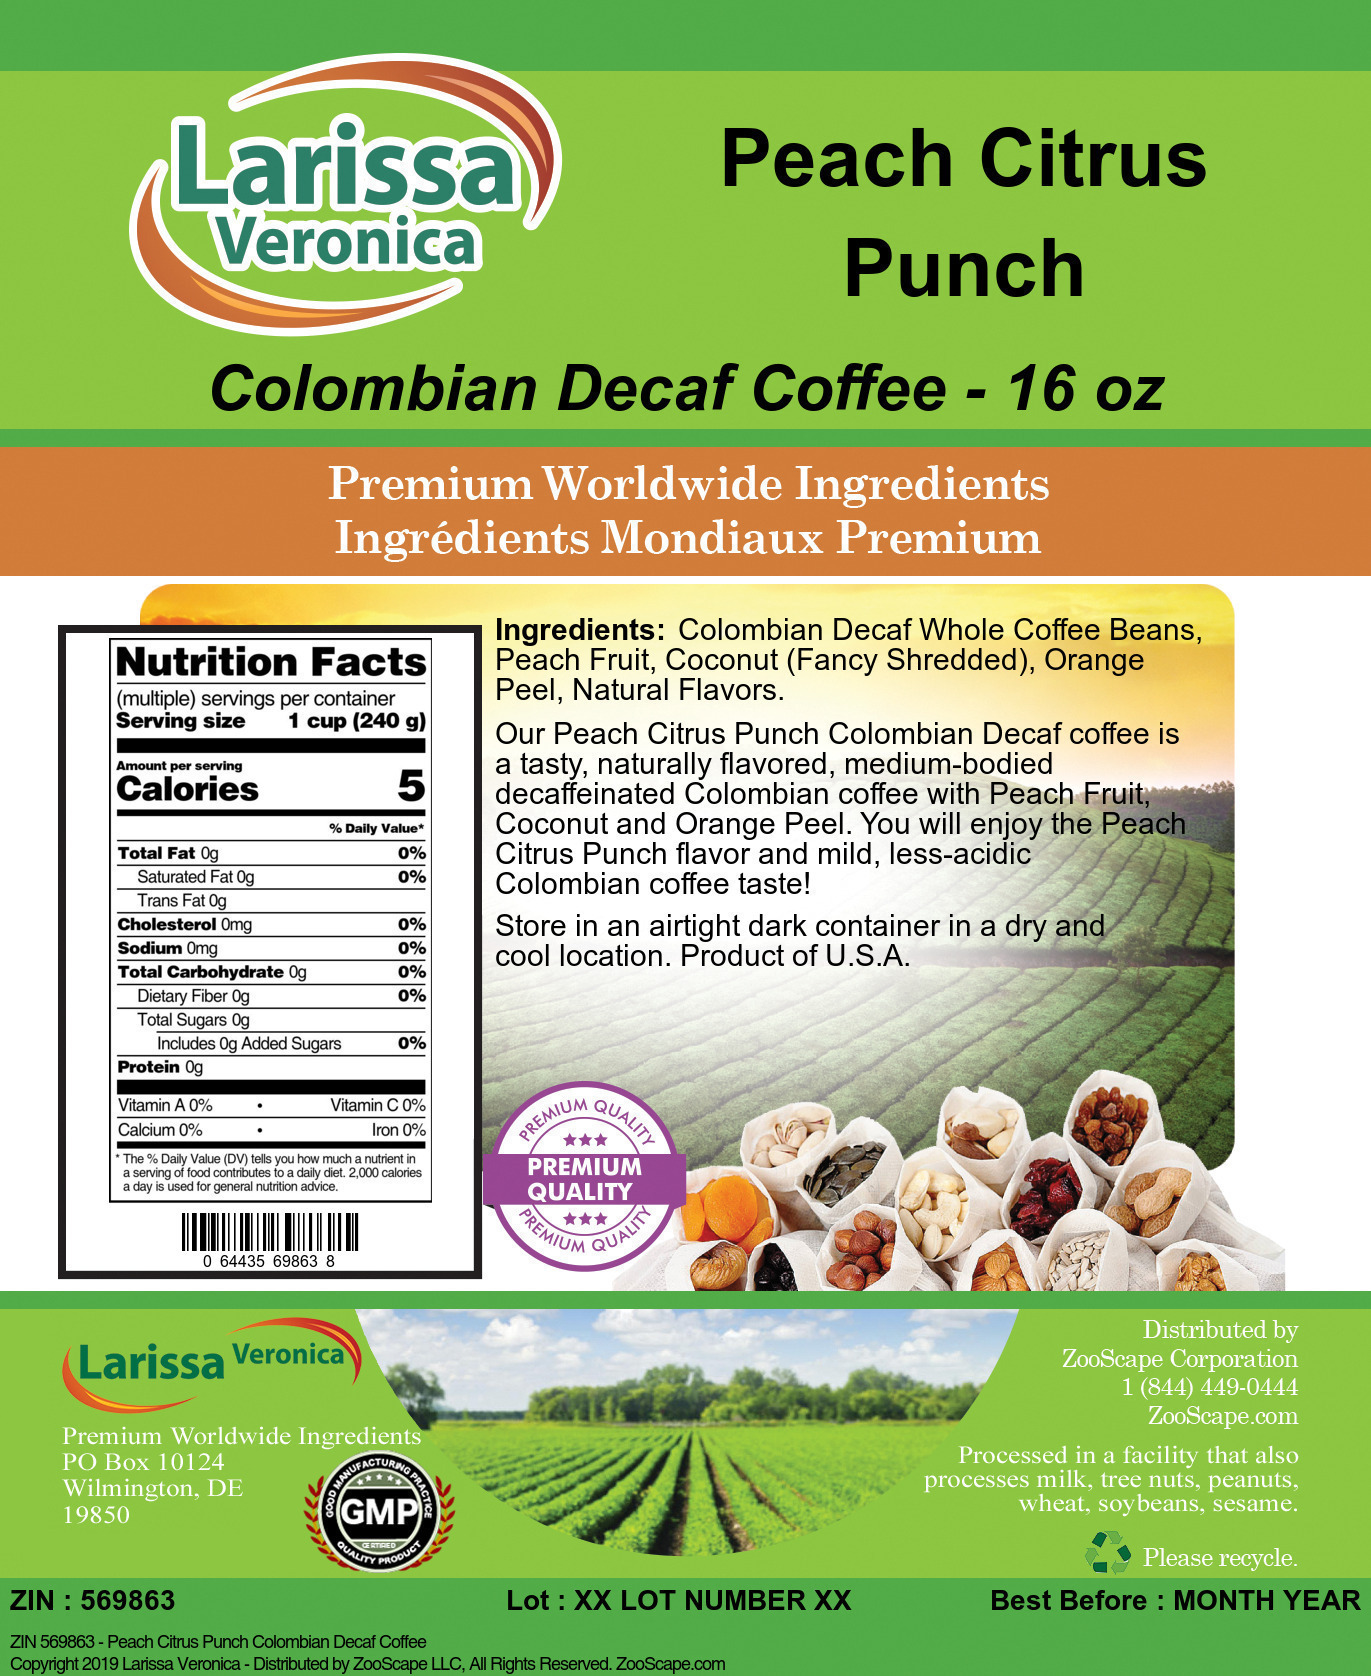 Peach Citrus Punch Colombian Decaf Coffee - Label